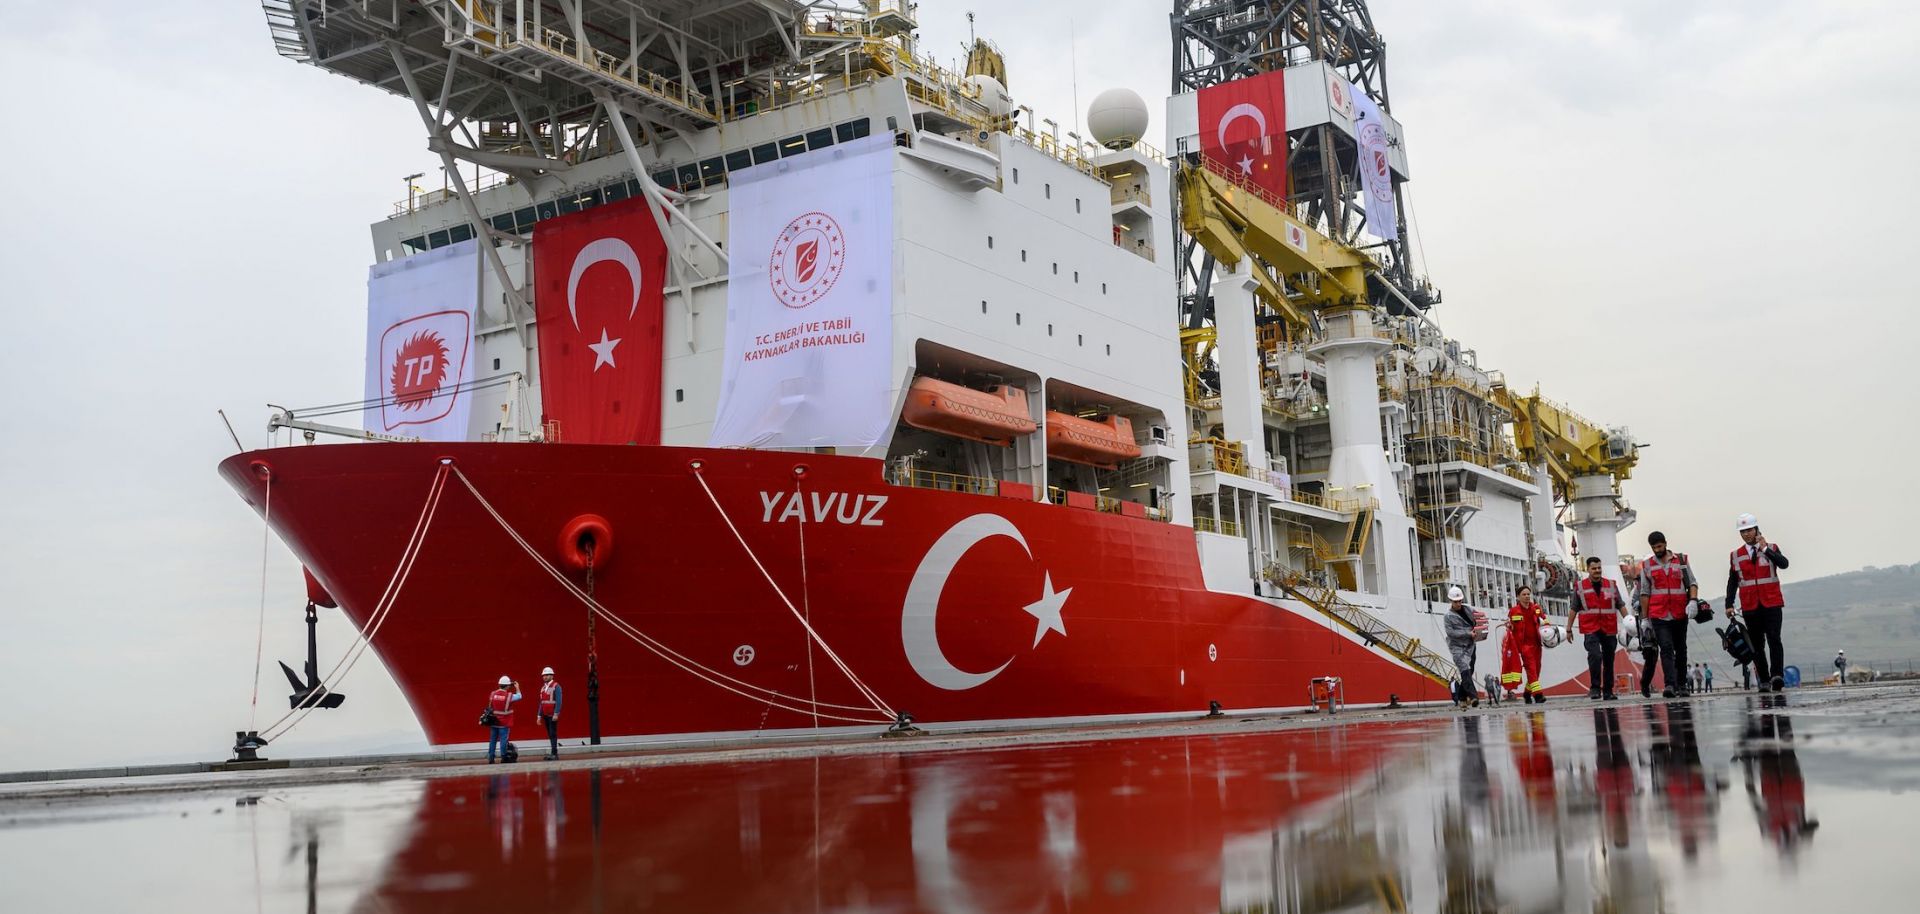 Journalists walk next to the Turkish drilling ship 'Yavuz,' scheduled to search for oil and gas off Cyprus, at the port of Dilovasi, outside Istanbul, on June 20, 2019.